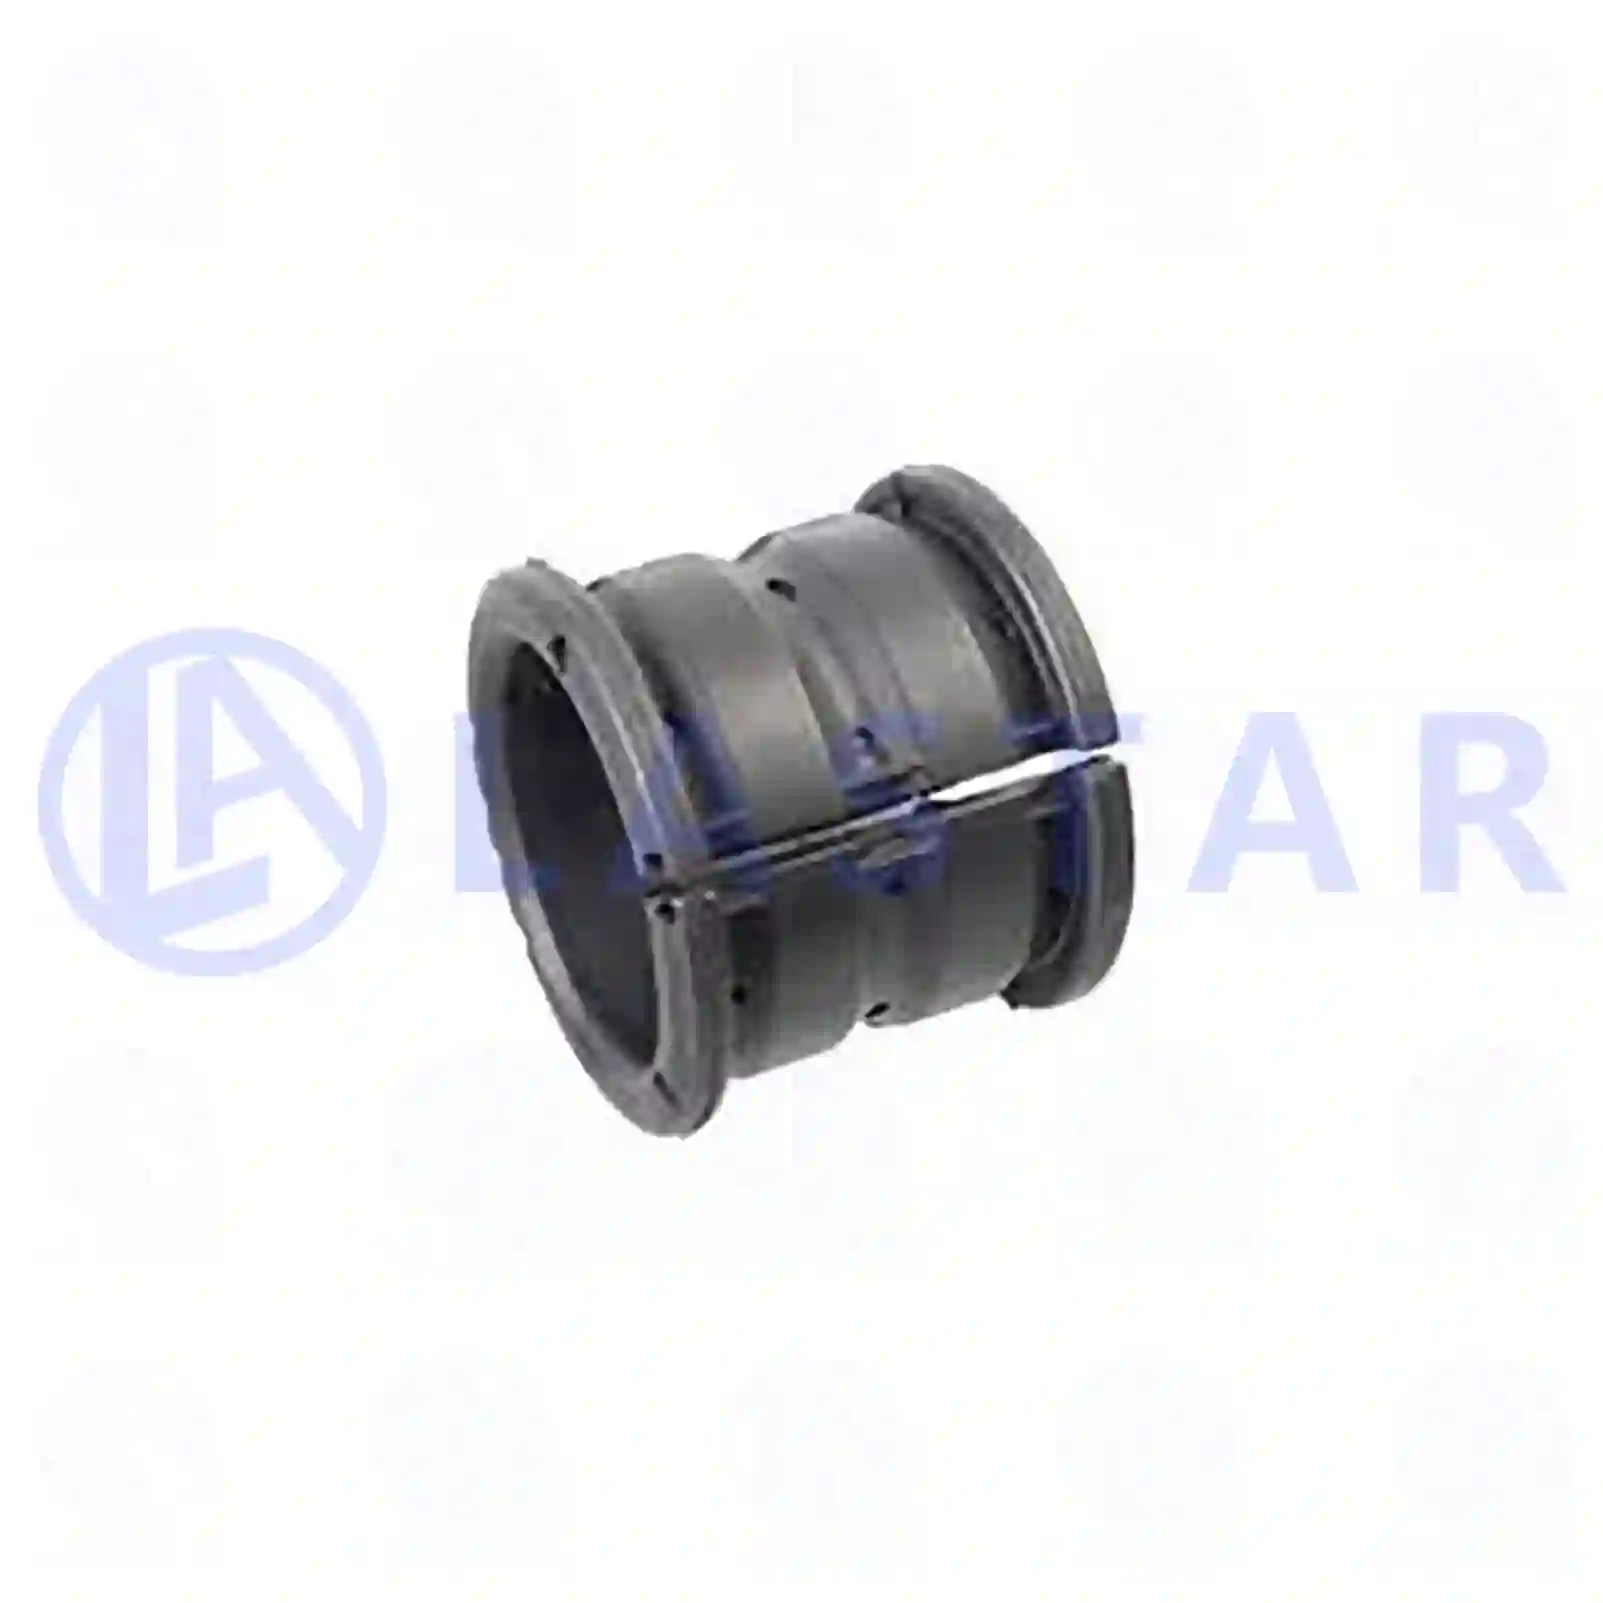 Bushing, stabilizer, 77727681, 2296839 ||  77727681 Lastar Spare Part | Truck Spare Parts, Auotomotive Spare Parts Bushing, stabilizer, 77727681, 2296839 ||  77727681 Lastar Spare Part | Truck Spare Parts, Auotomotive Spare Parts